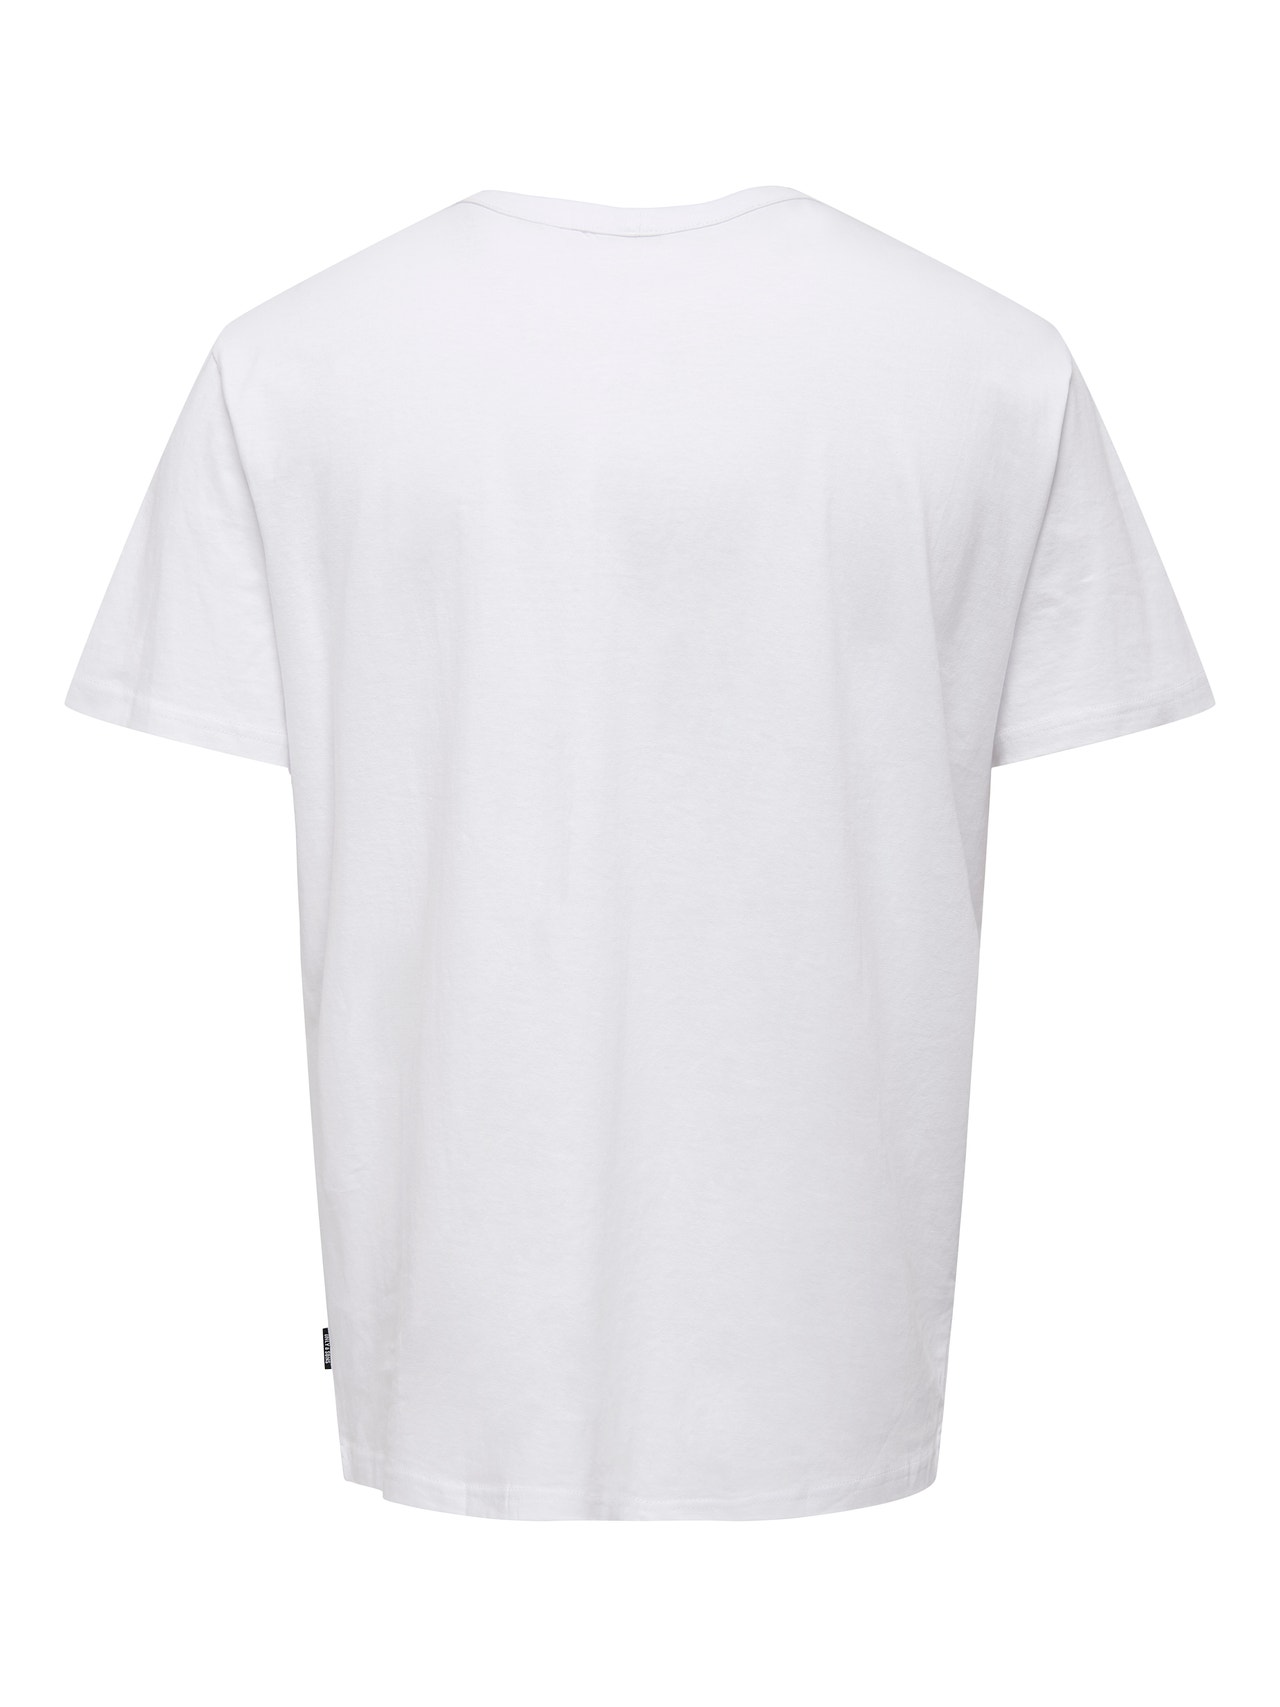 ONLY & SONS O-hals t-shirt med print -Bright White - 22026378